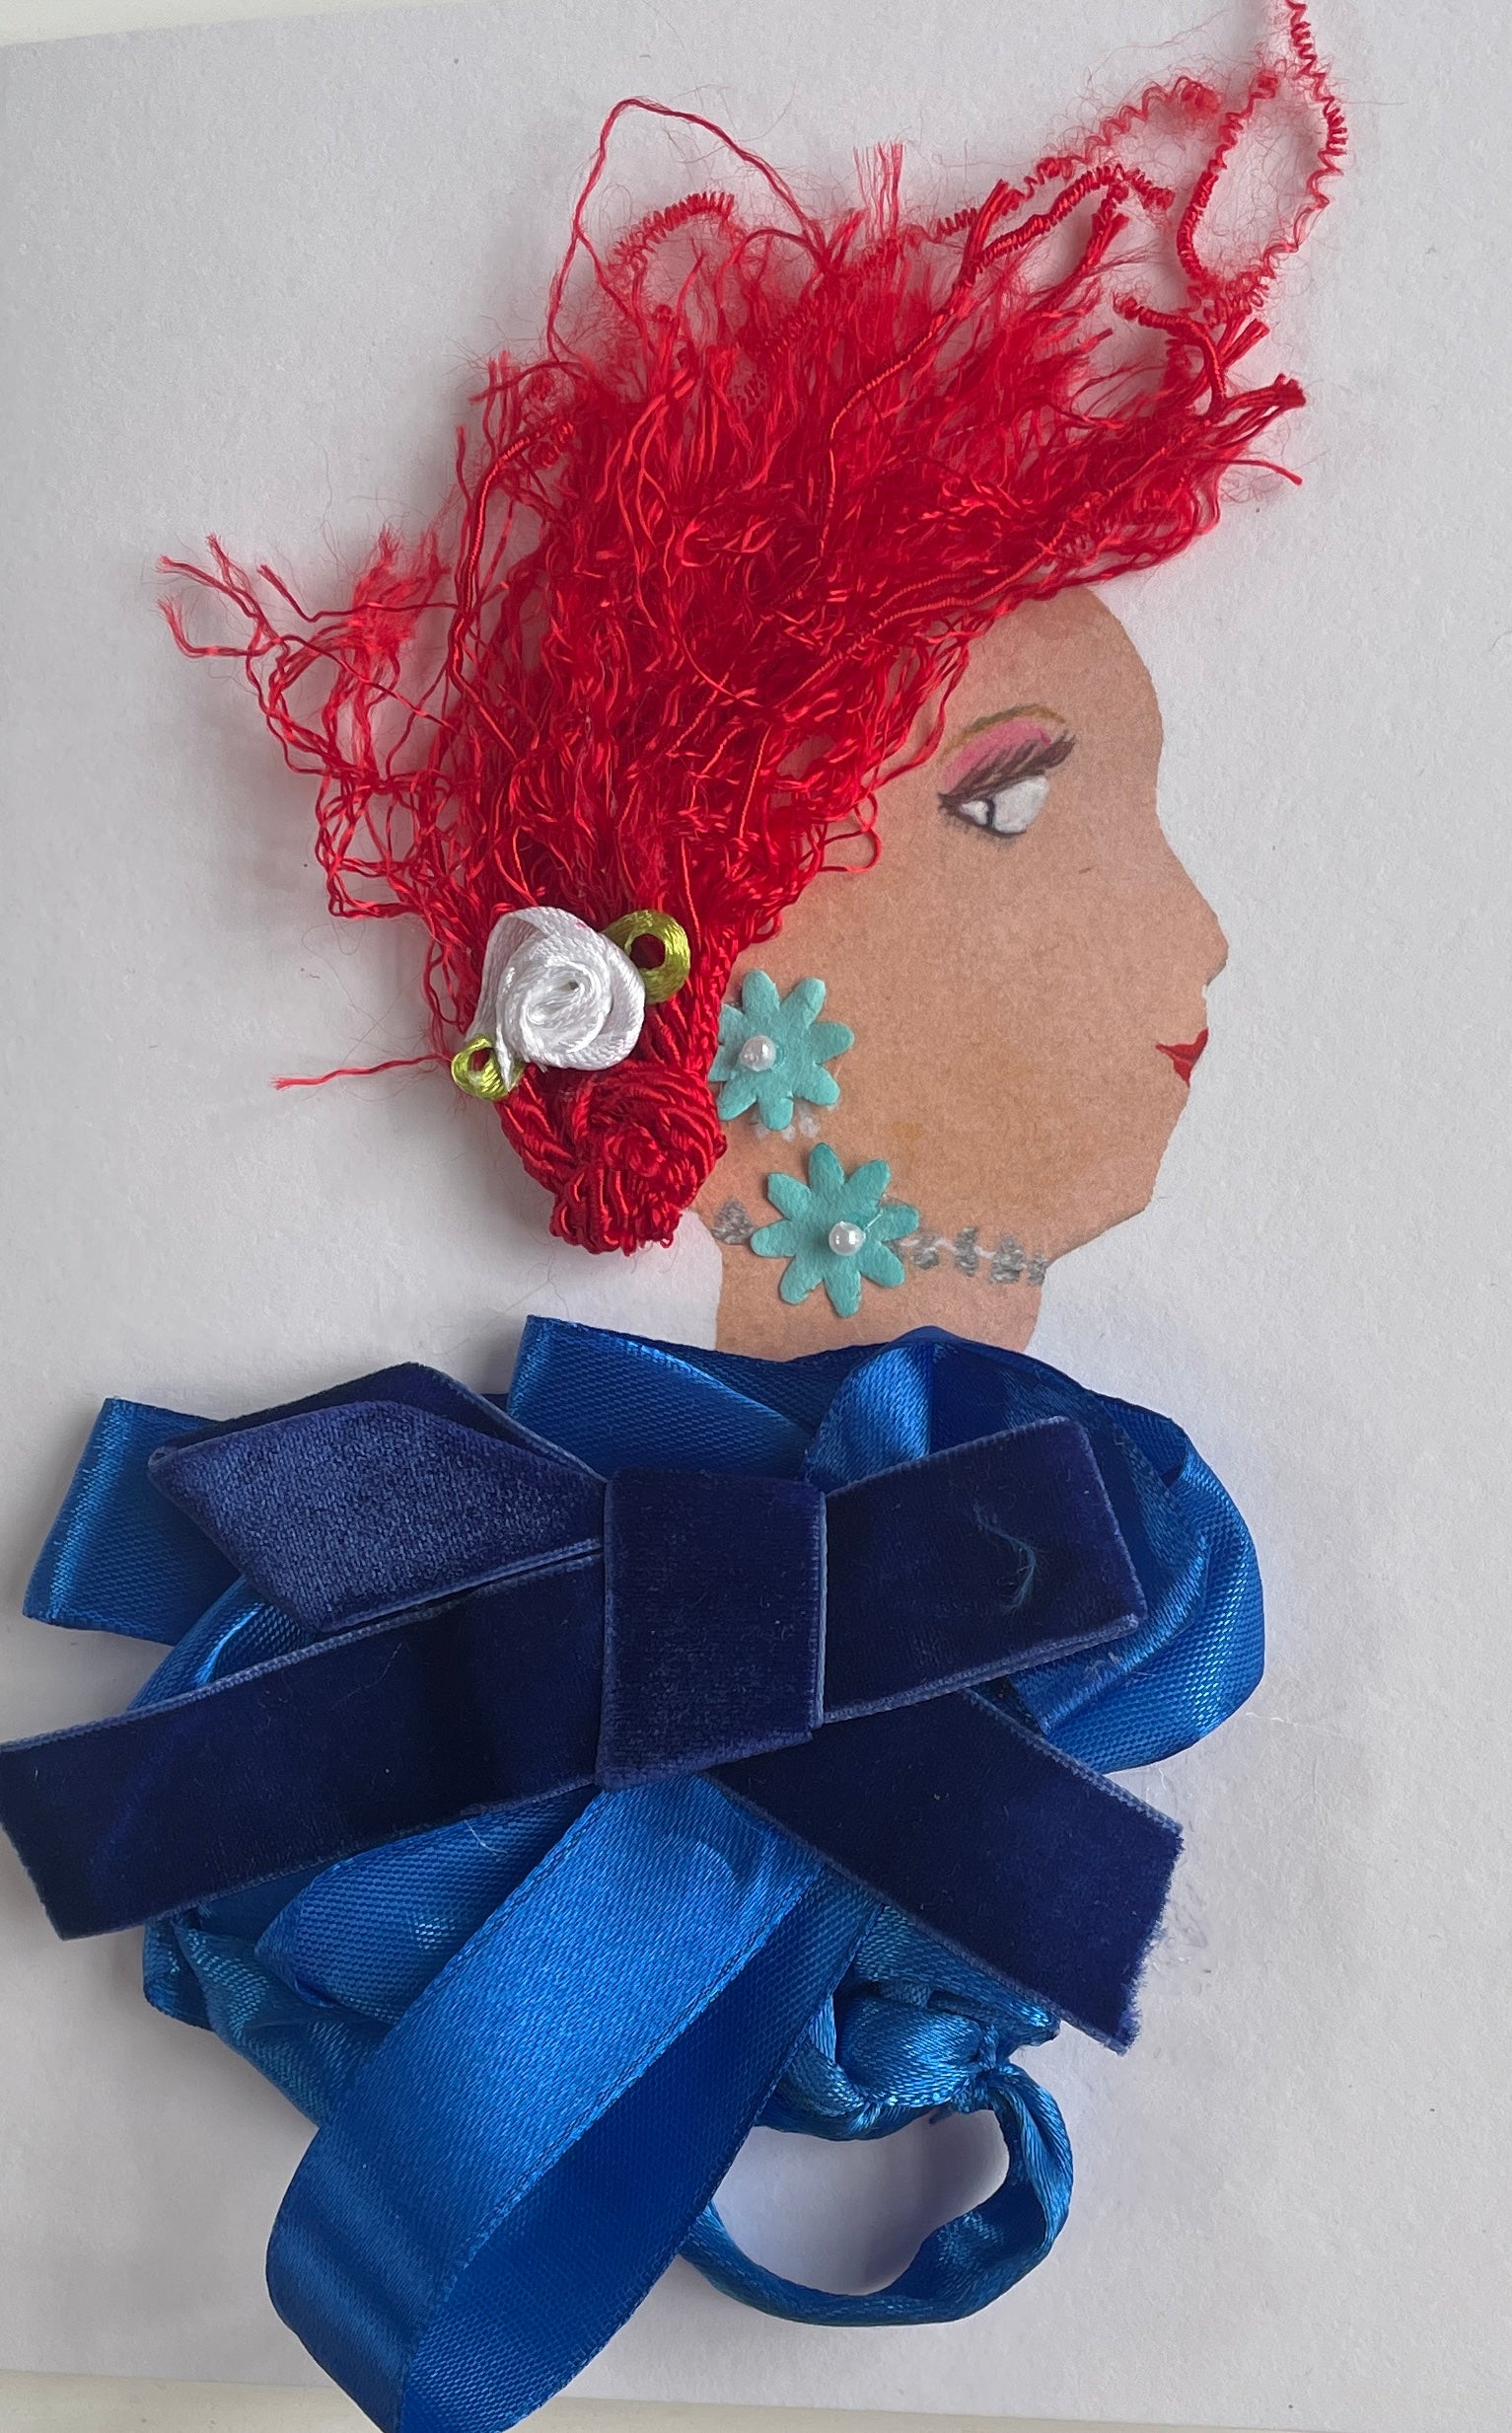 This card has been given the name Doncaster Darling. She wears a royal blue blouse made of satin type fabric ,and a darker blue velvet bow on top. Her hair is red and curly, and she has a small white rose in it. Her earrings are blue daisies and so is her necklace. A Good card to send or keep.